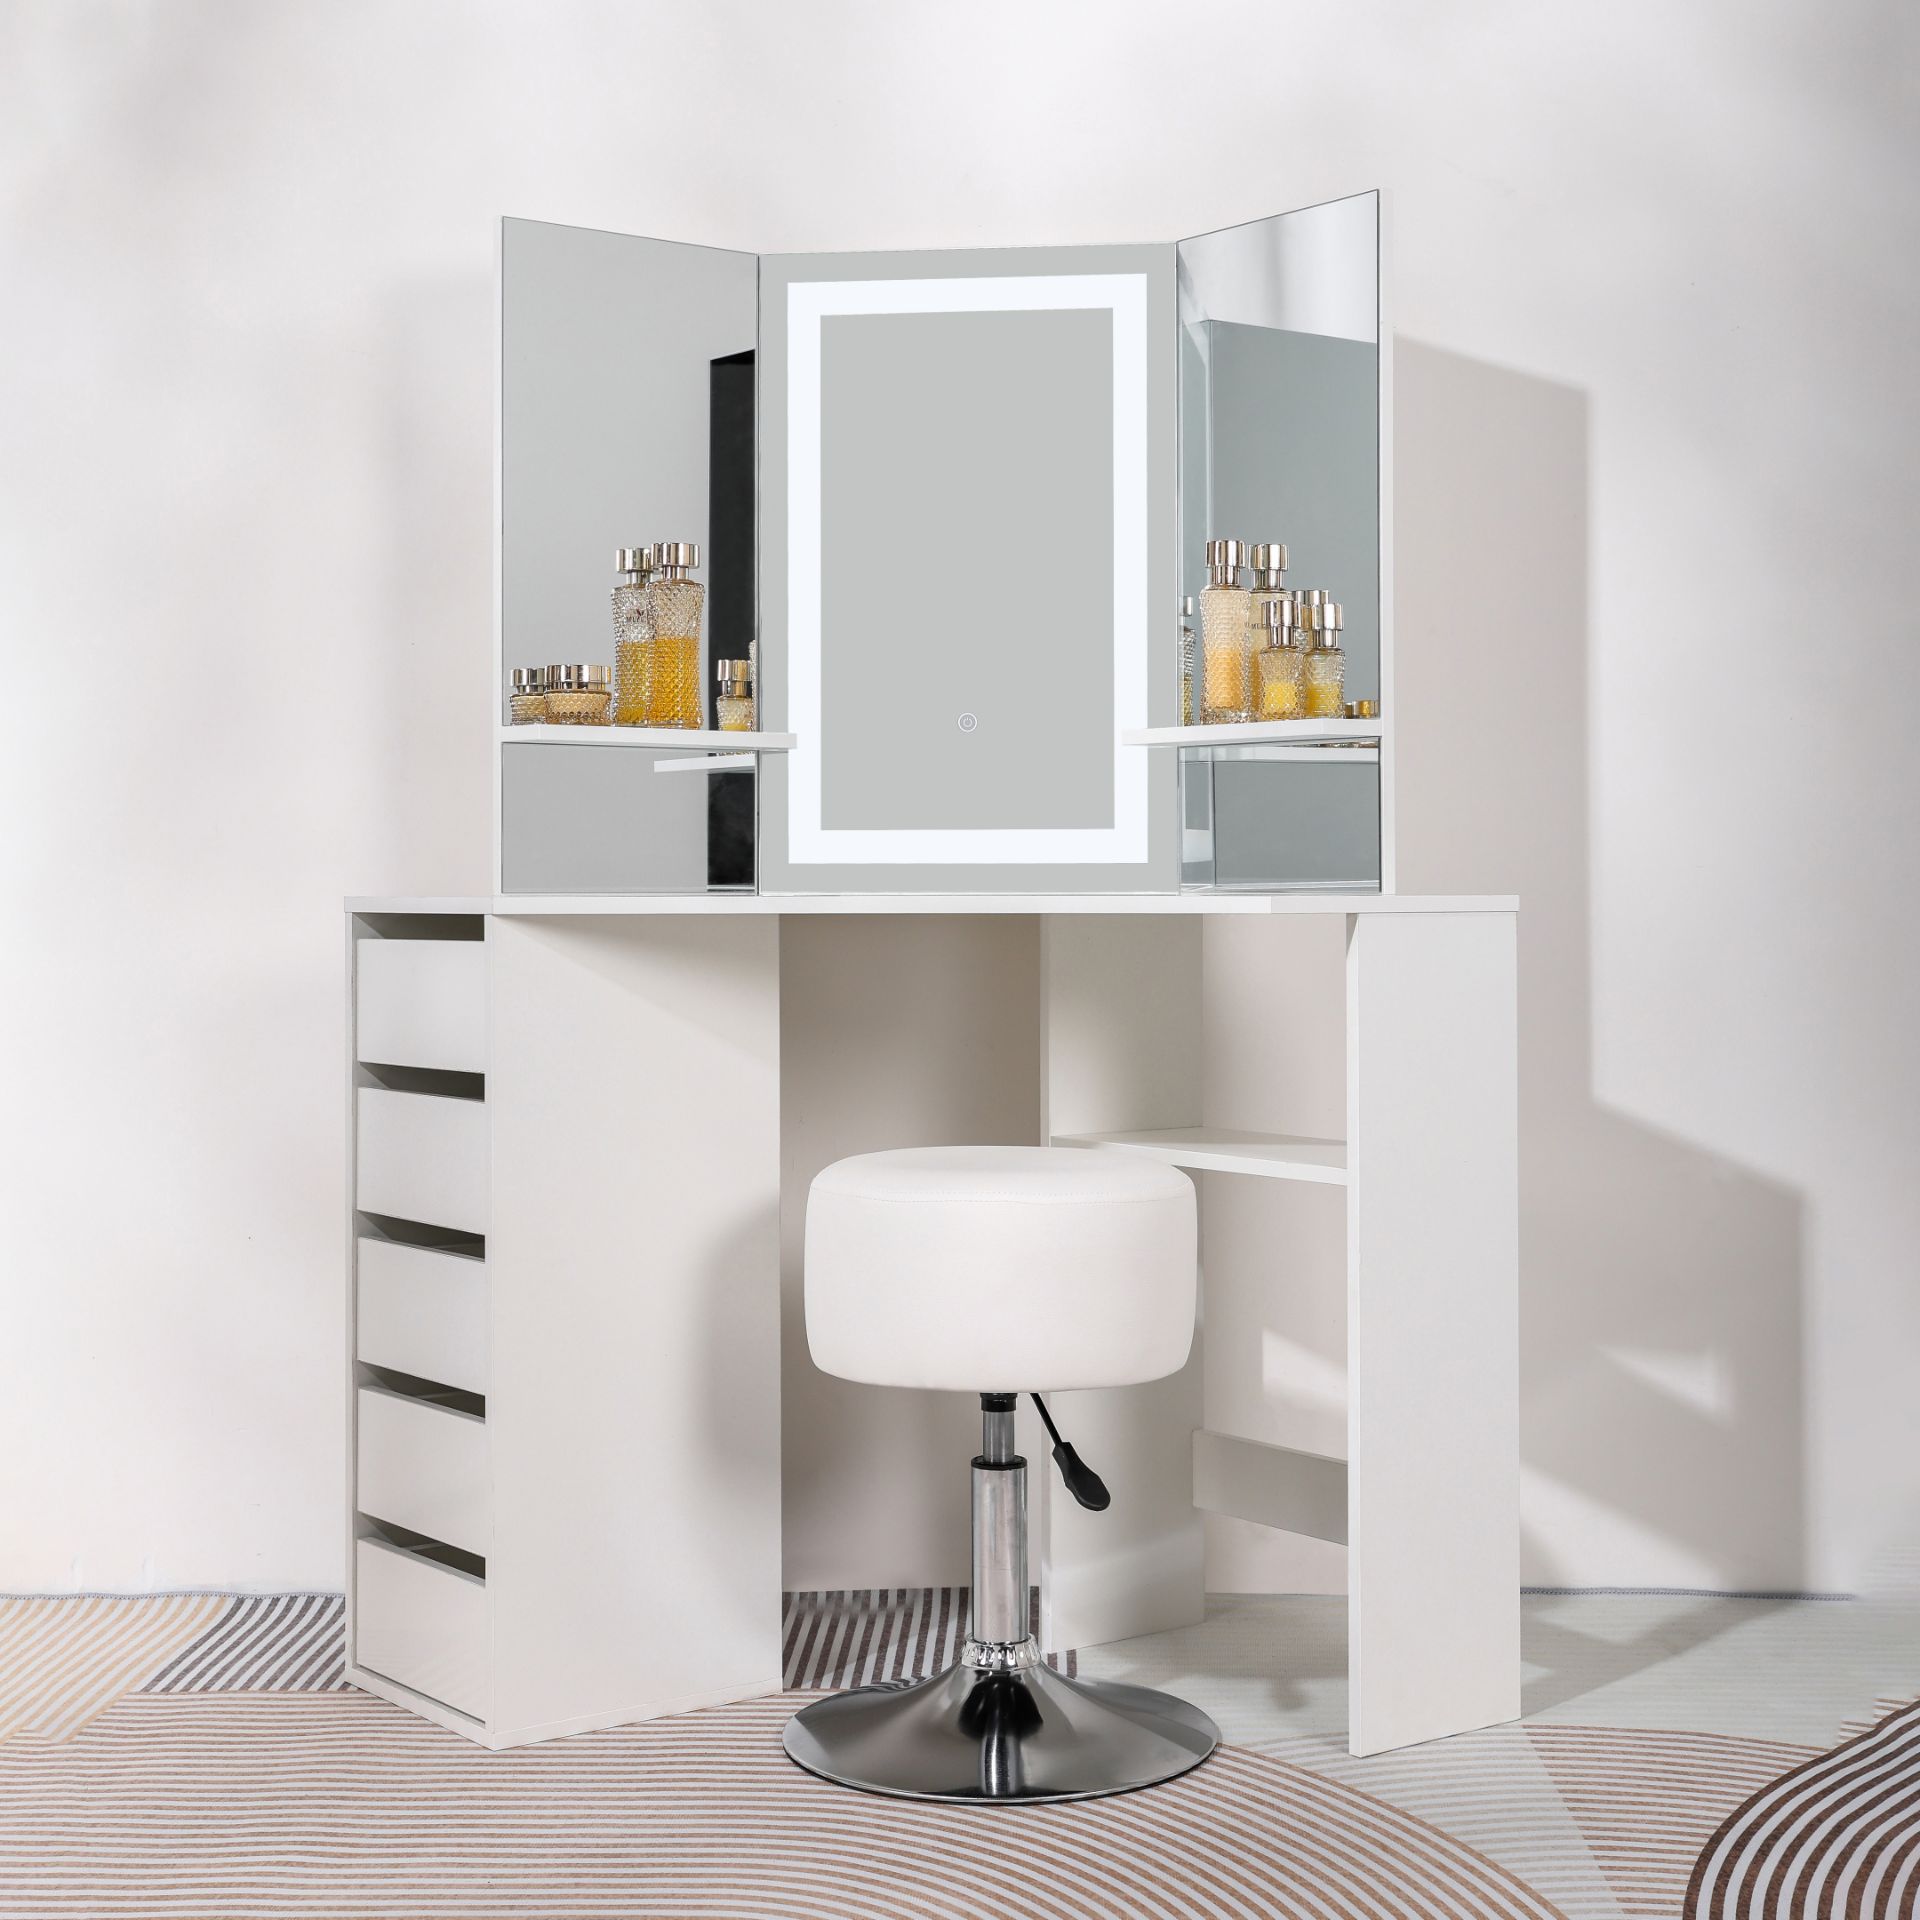 5 DRAWER MAKE UP CORNER DRESSING TABLE WITH TOUCH LED MIRROR AND STOOL - WHITE RRP £349.99 - Image 3 of 4